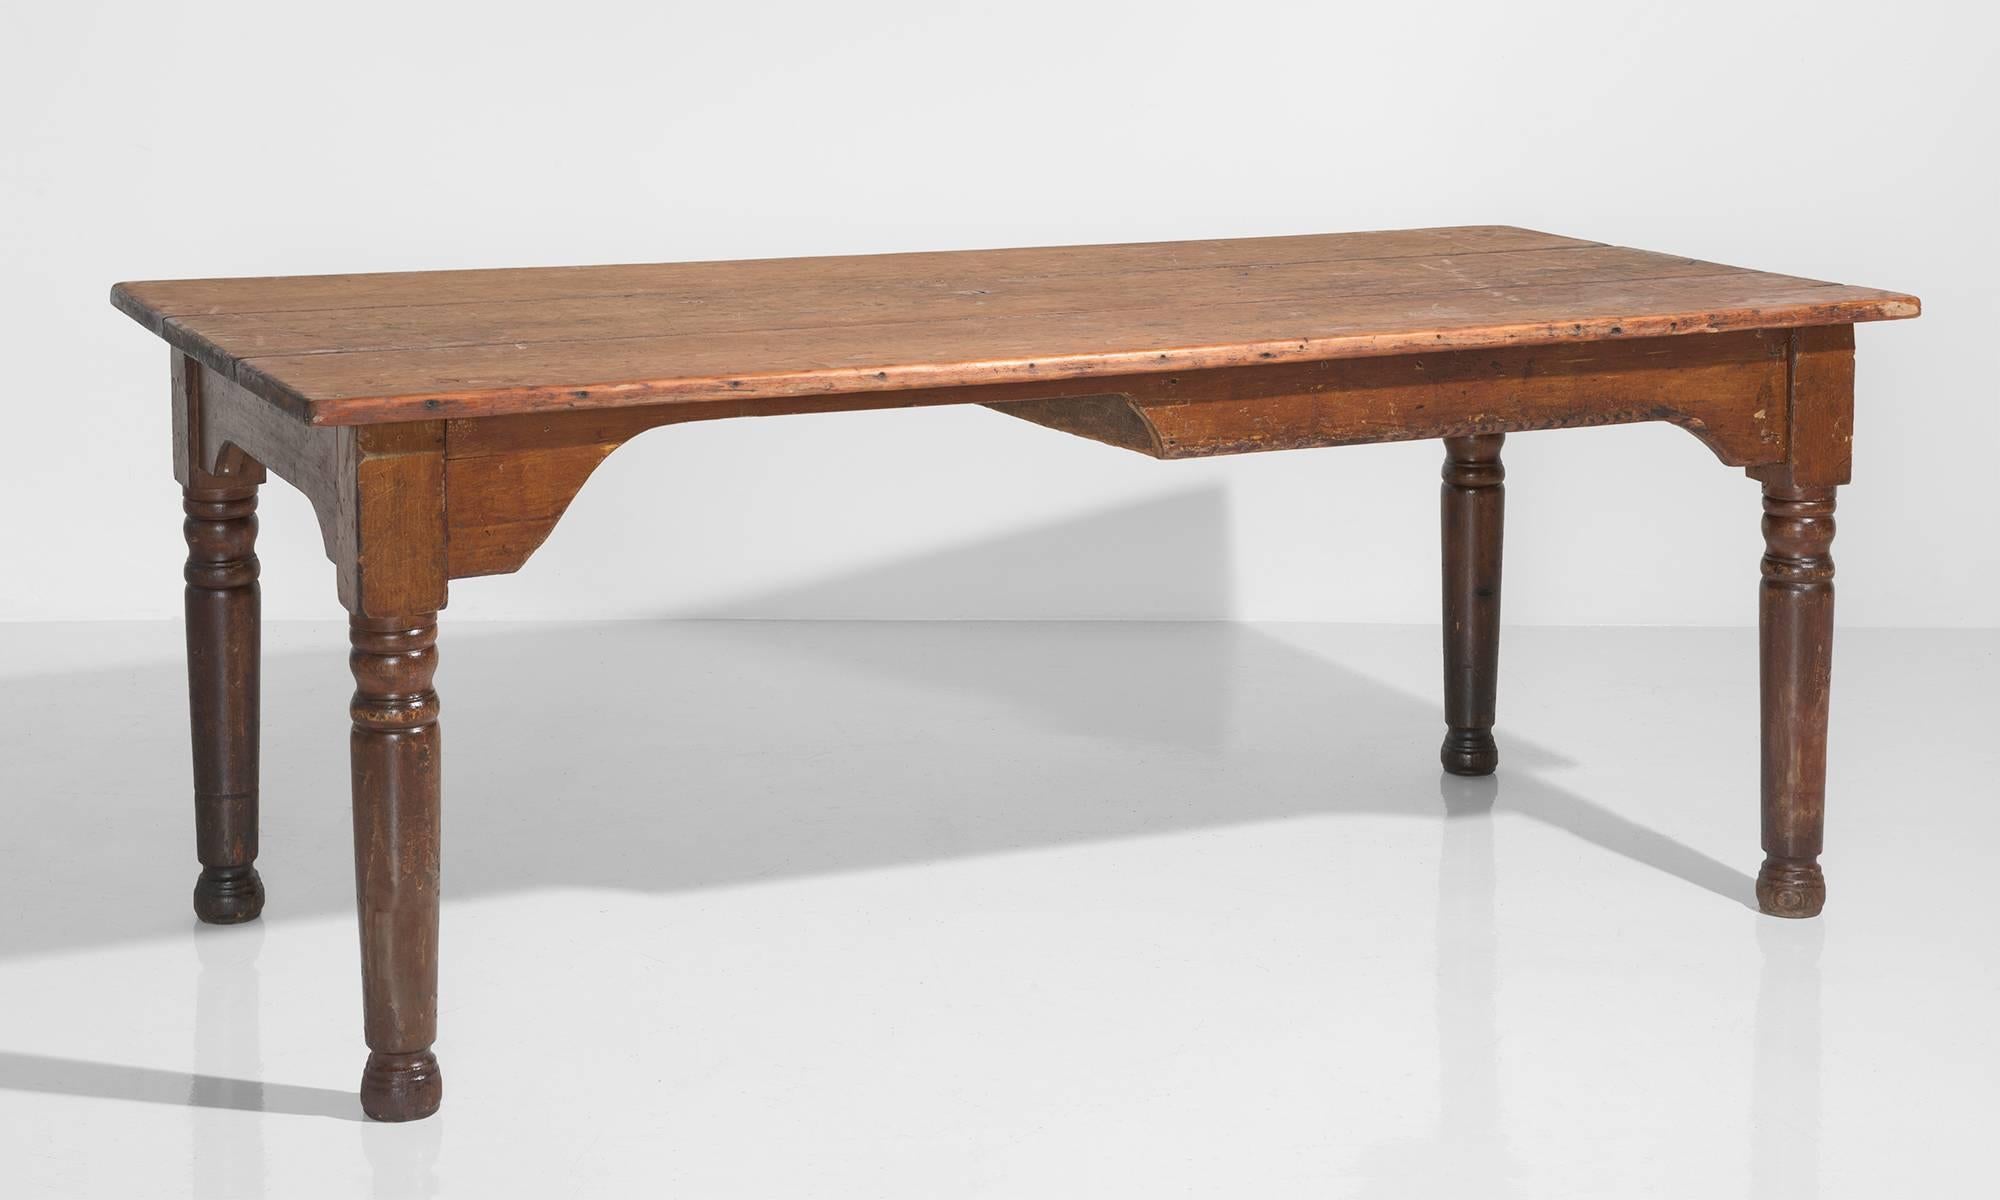 Pine Desk, circa 1900

Wonderfully patinated pine table top with turned legs.